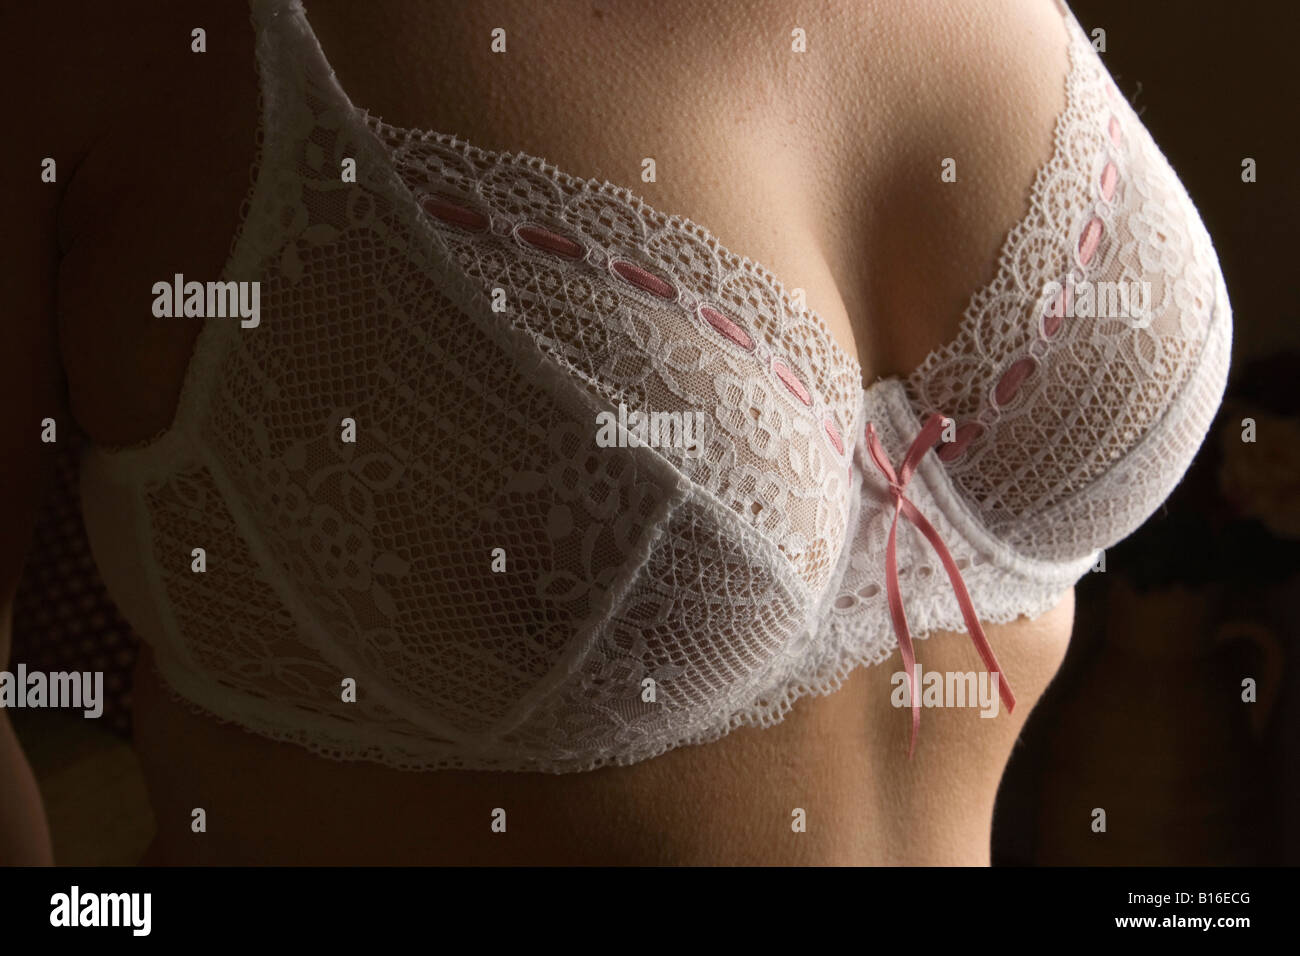 34D Bra Size: What It Is and What 34D Breasts Look Like 